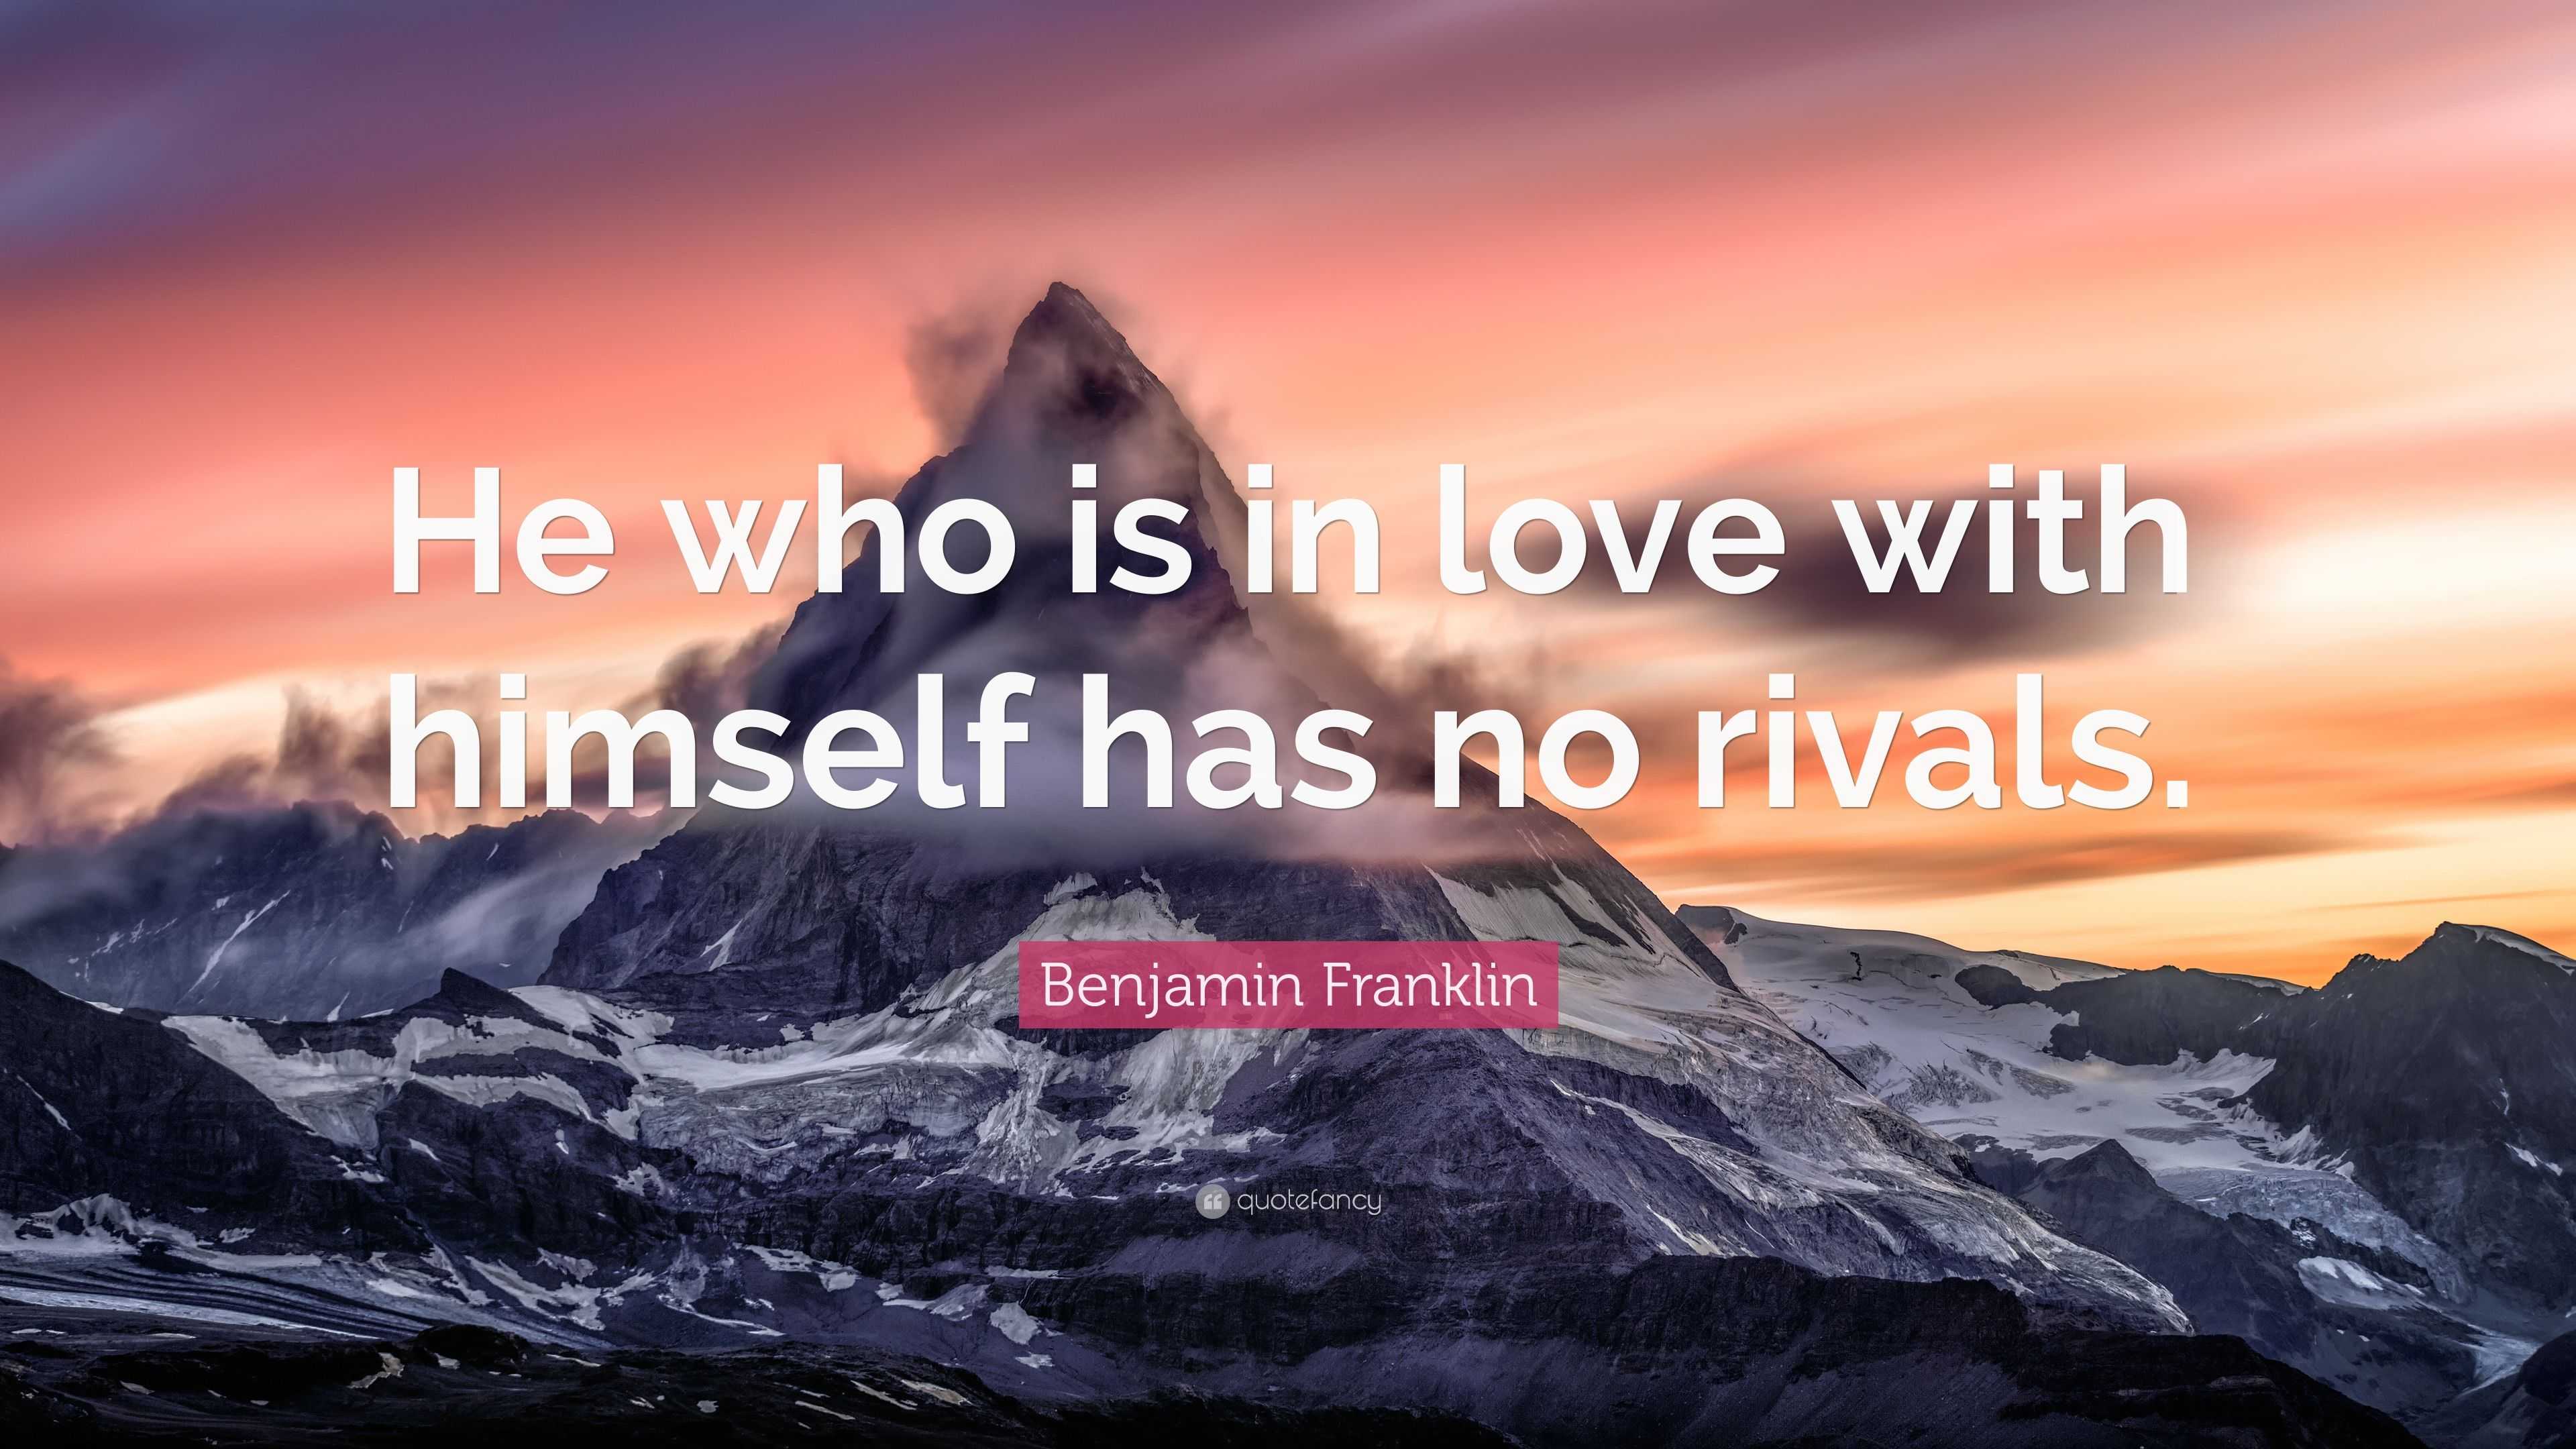 Benjamin Franklin Quote: “He who is in love with himself has no rivals.”